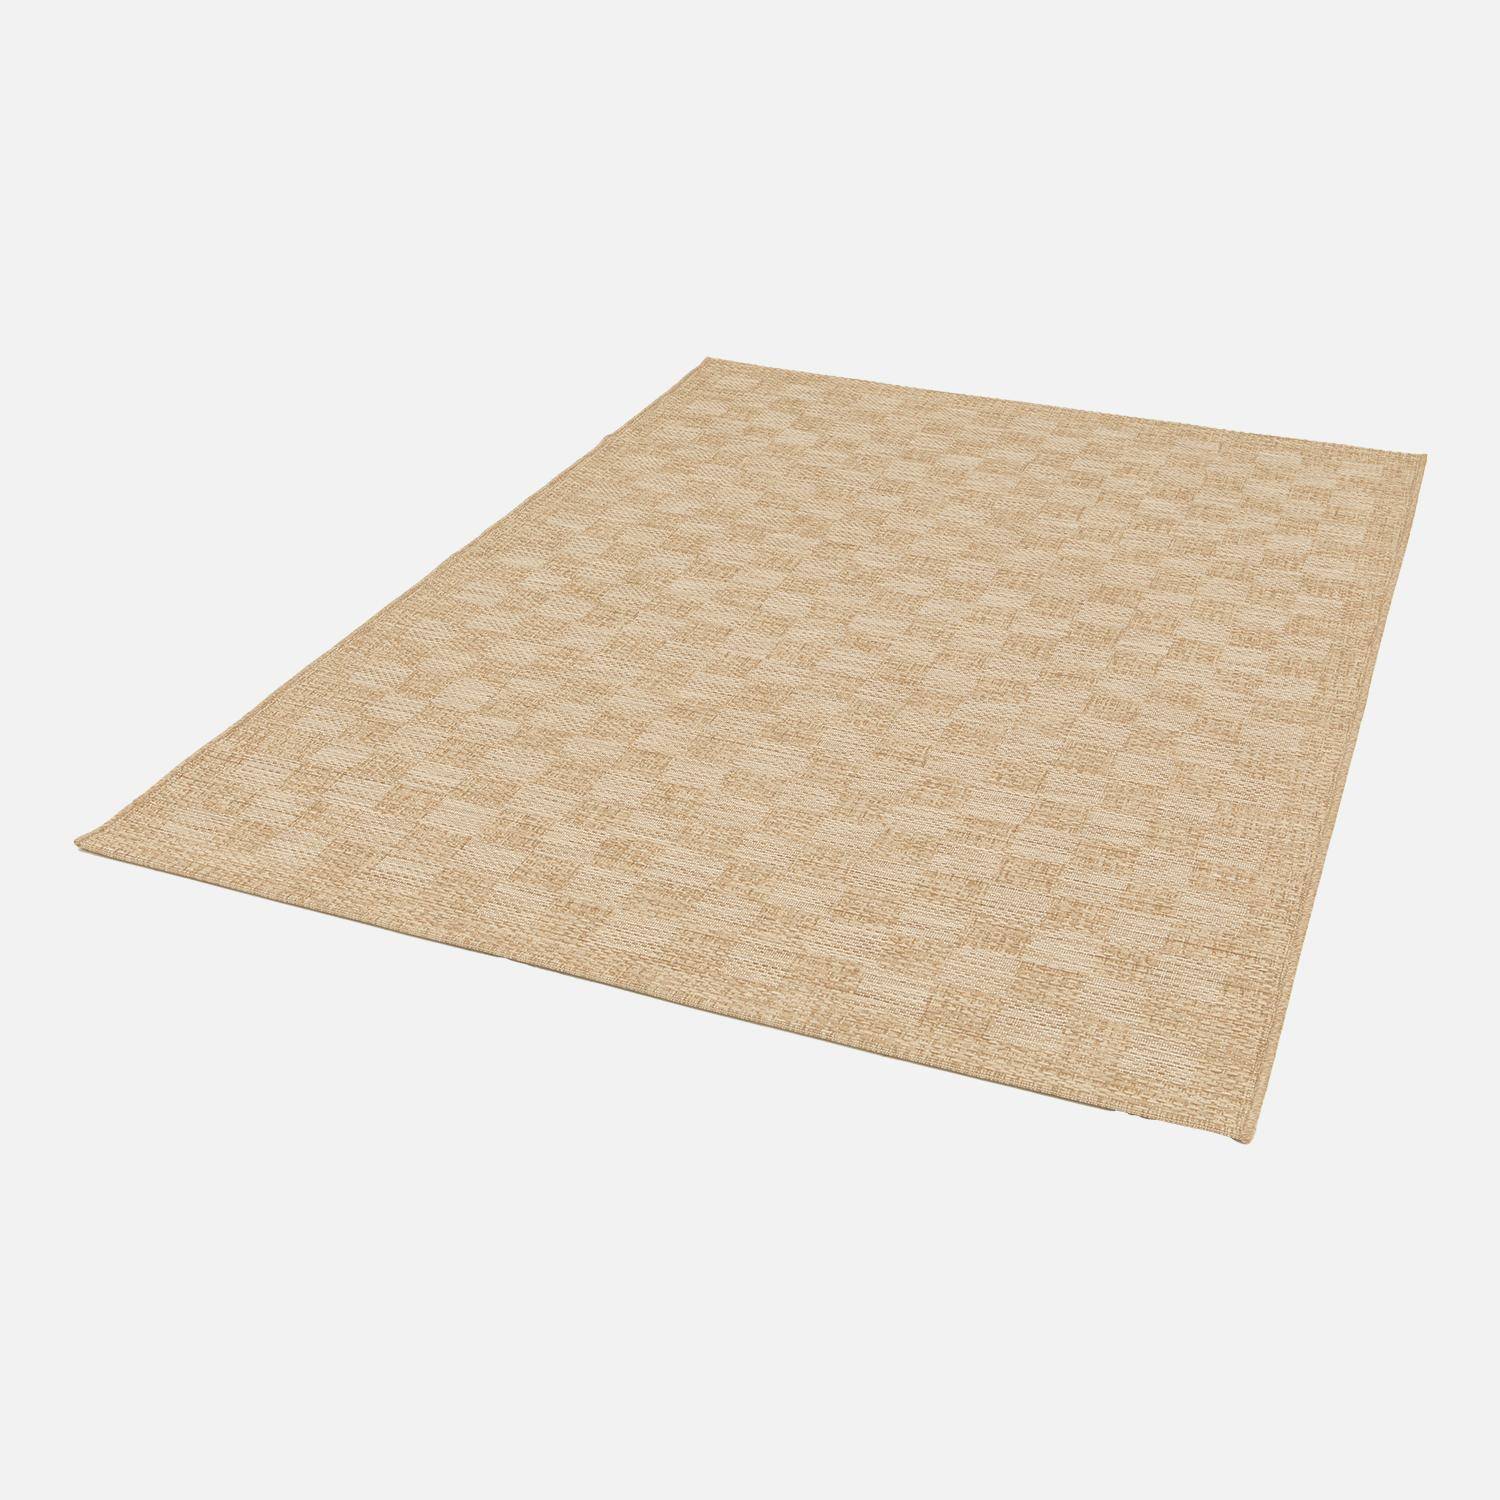 Jute-effect indoor/outdoor carpet with chequered pattern, Carrie, 120 x 170 cm,sweeek,Photo3